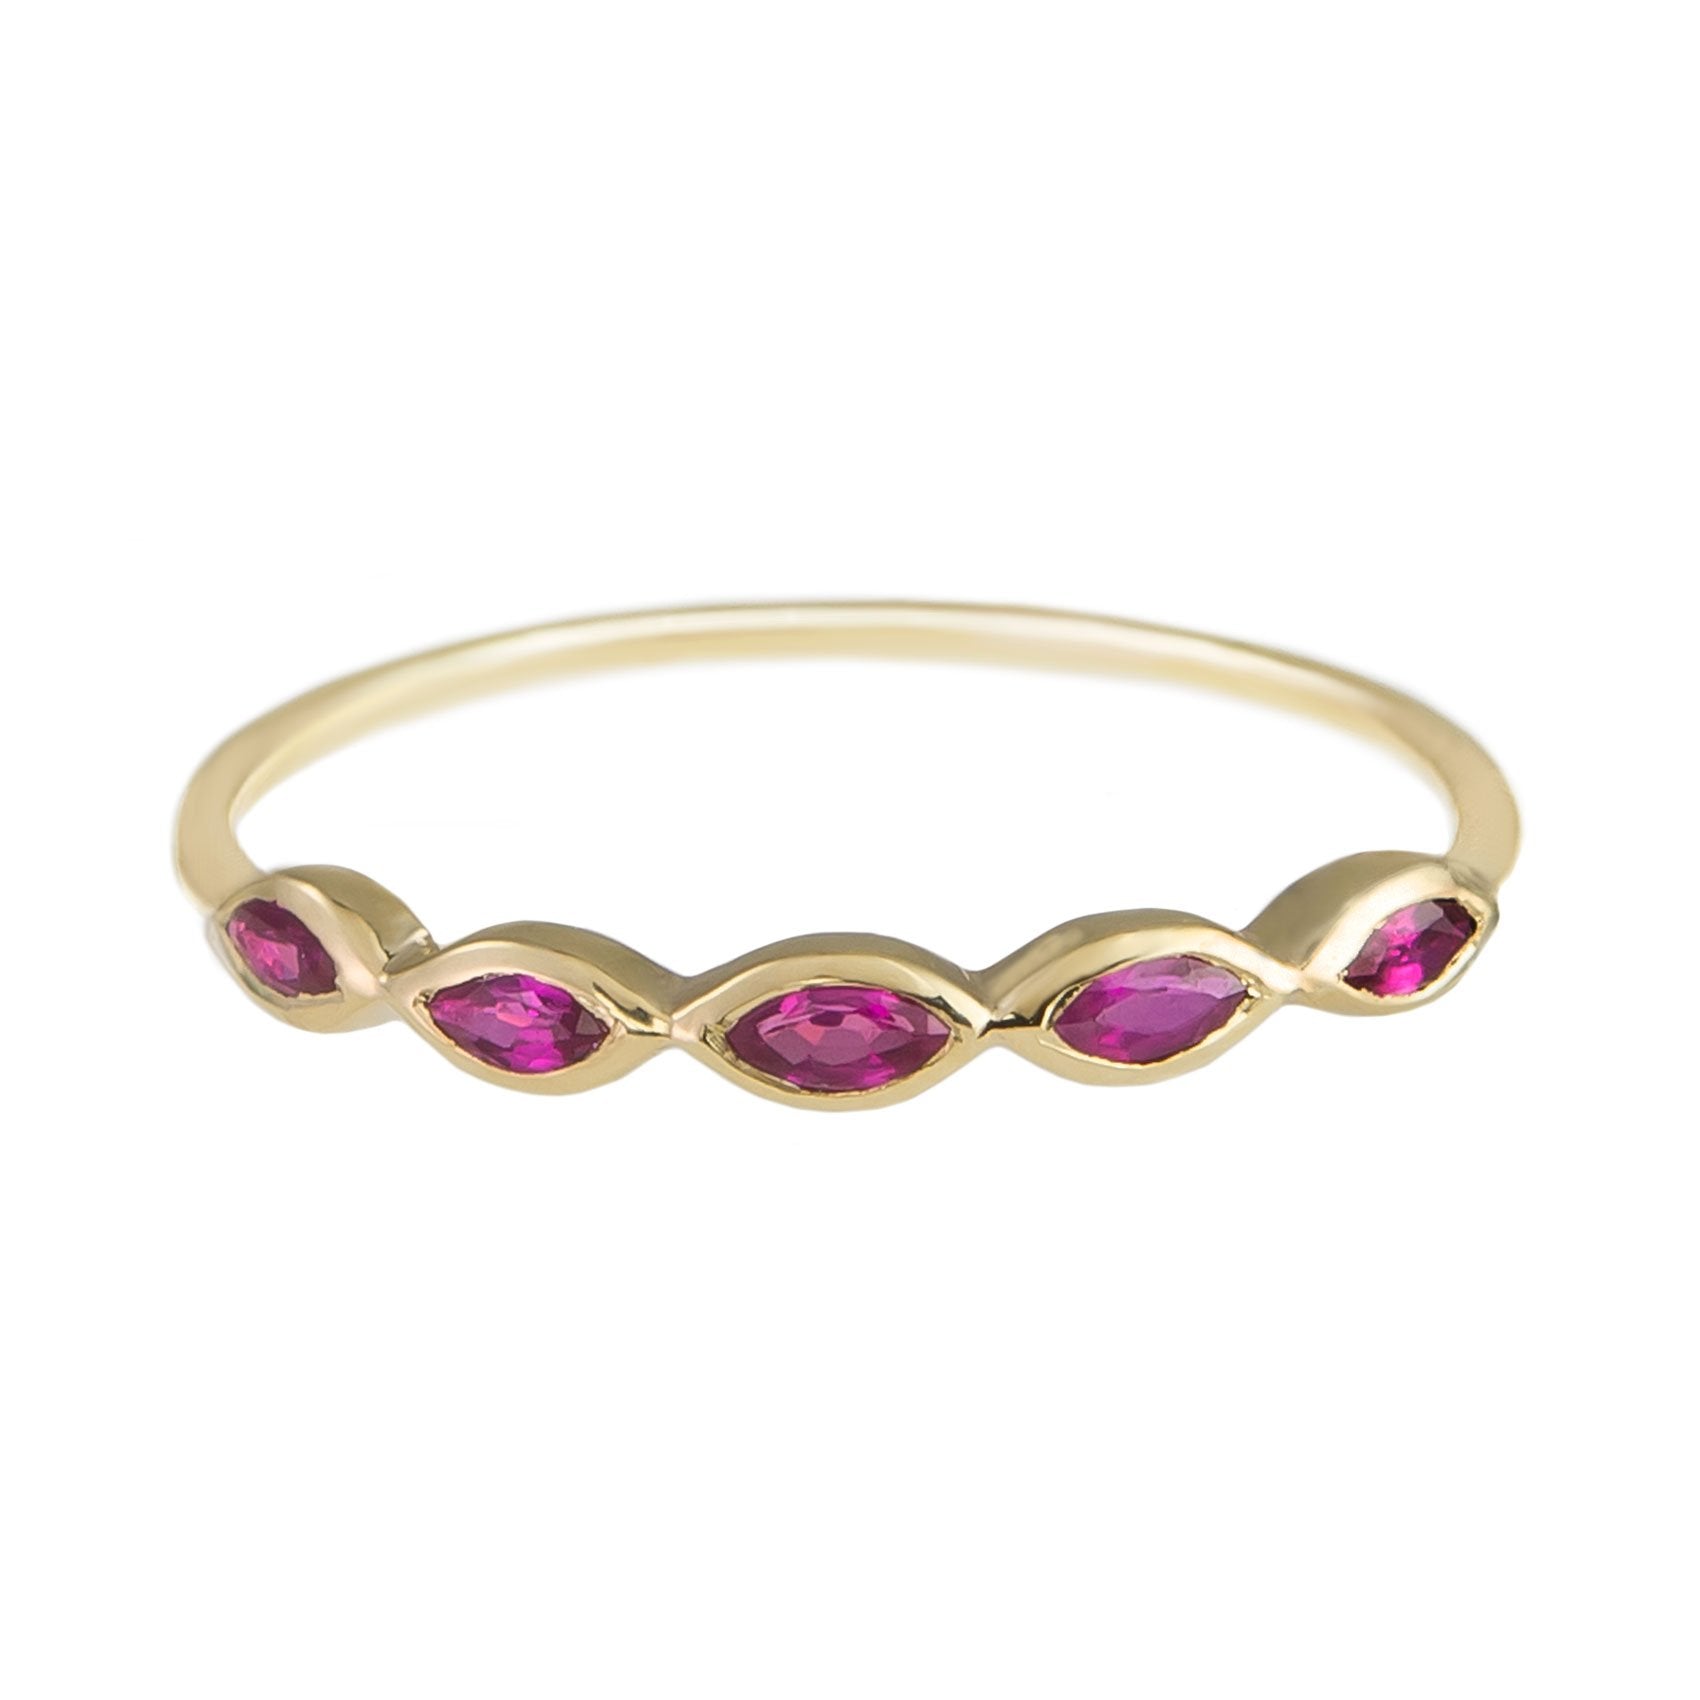 Metier by tomfoolery 5 Stone Ruby Ring in 9ct Yellow Gold with Marquise Rubies